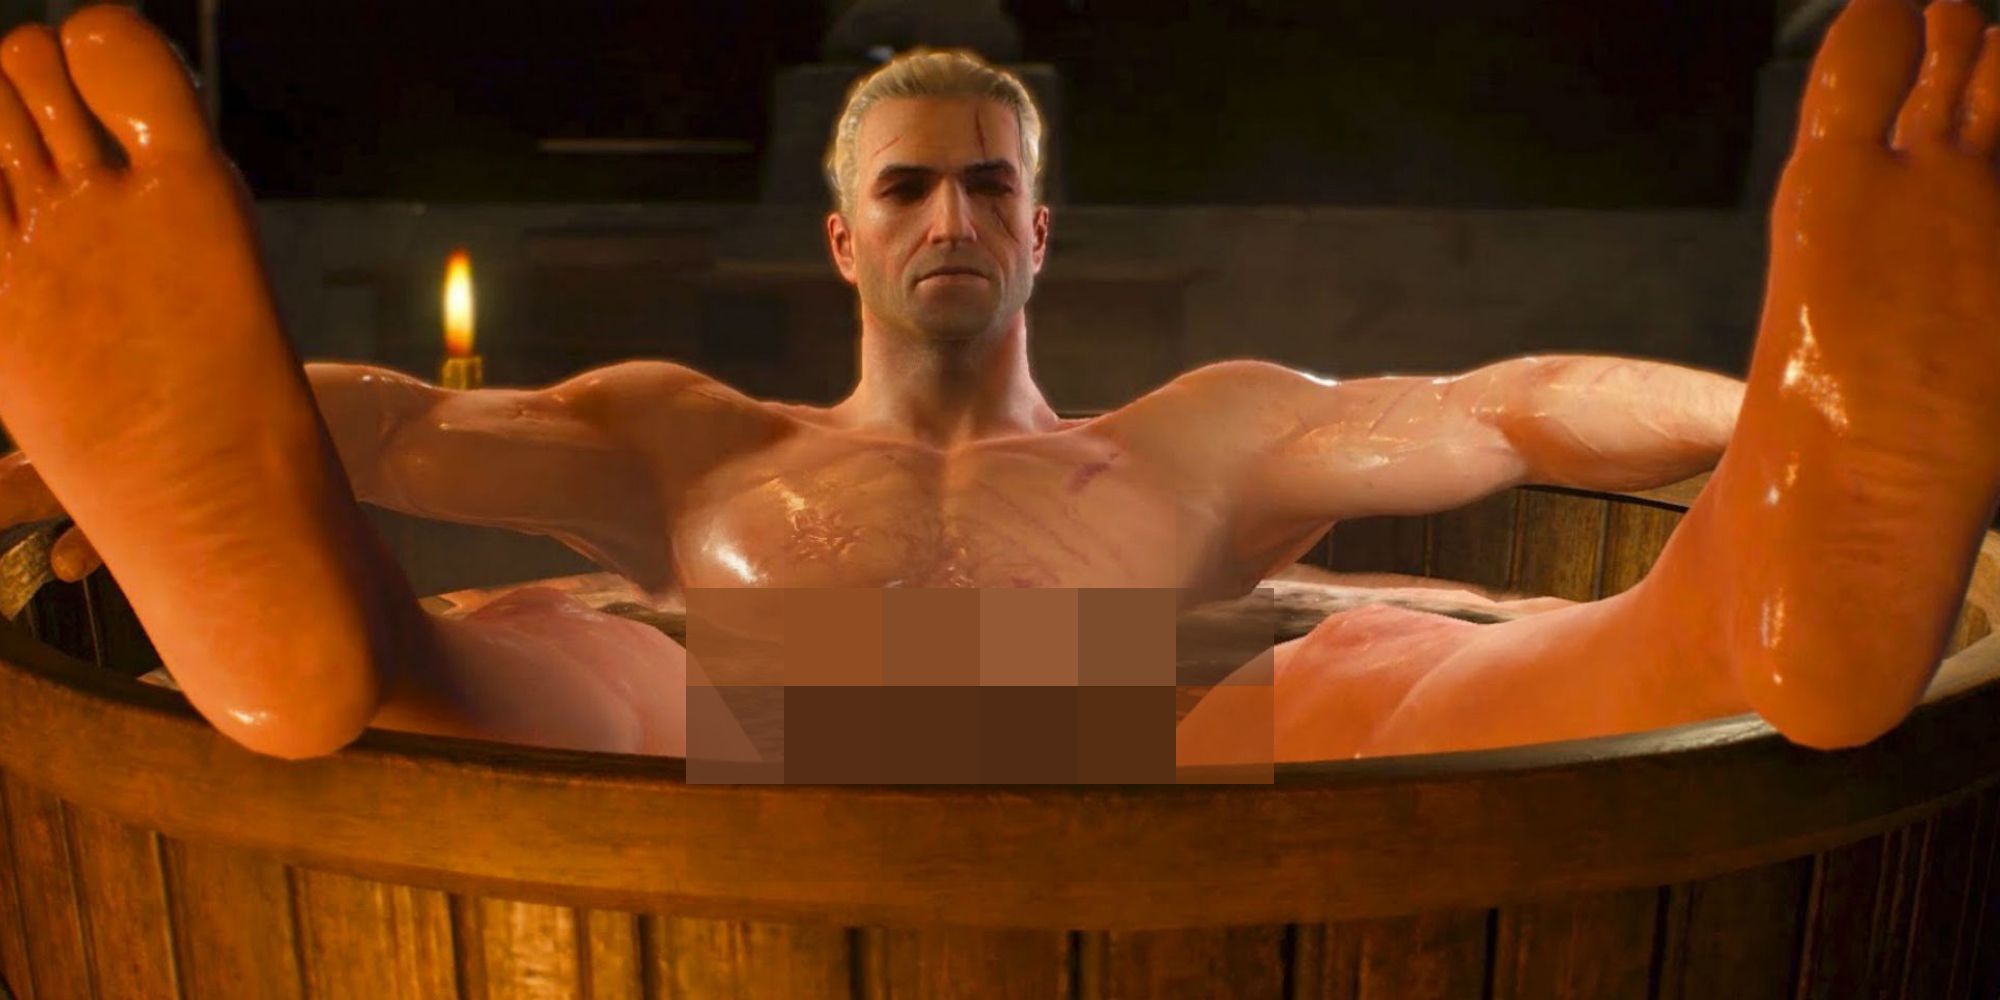 Best of The witcher 3 nude mod